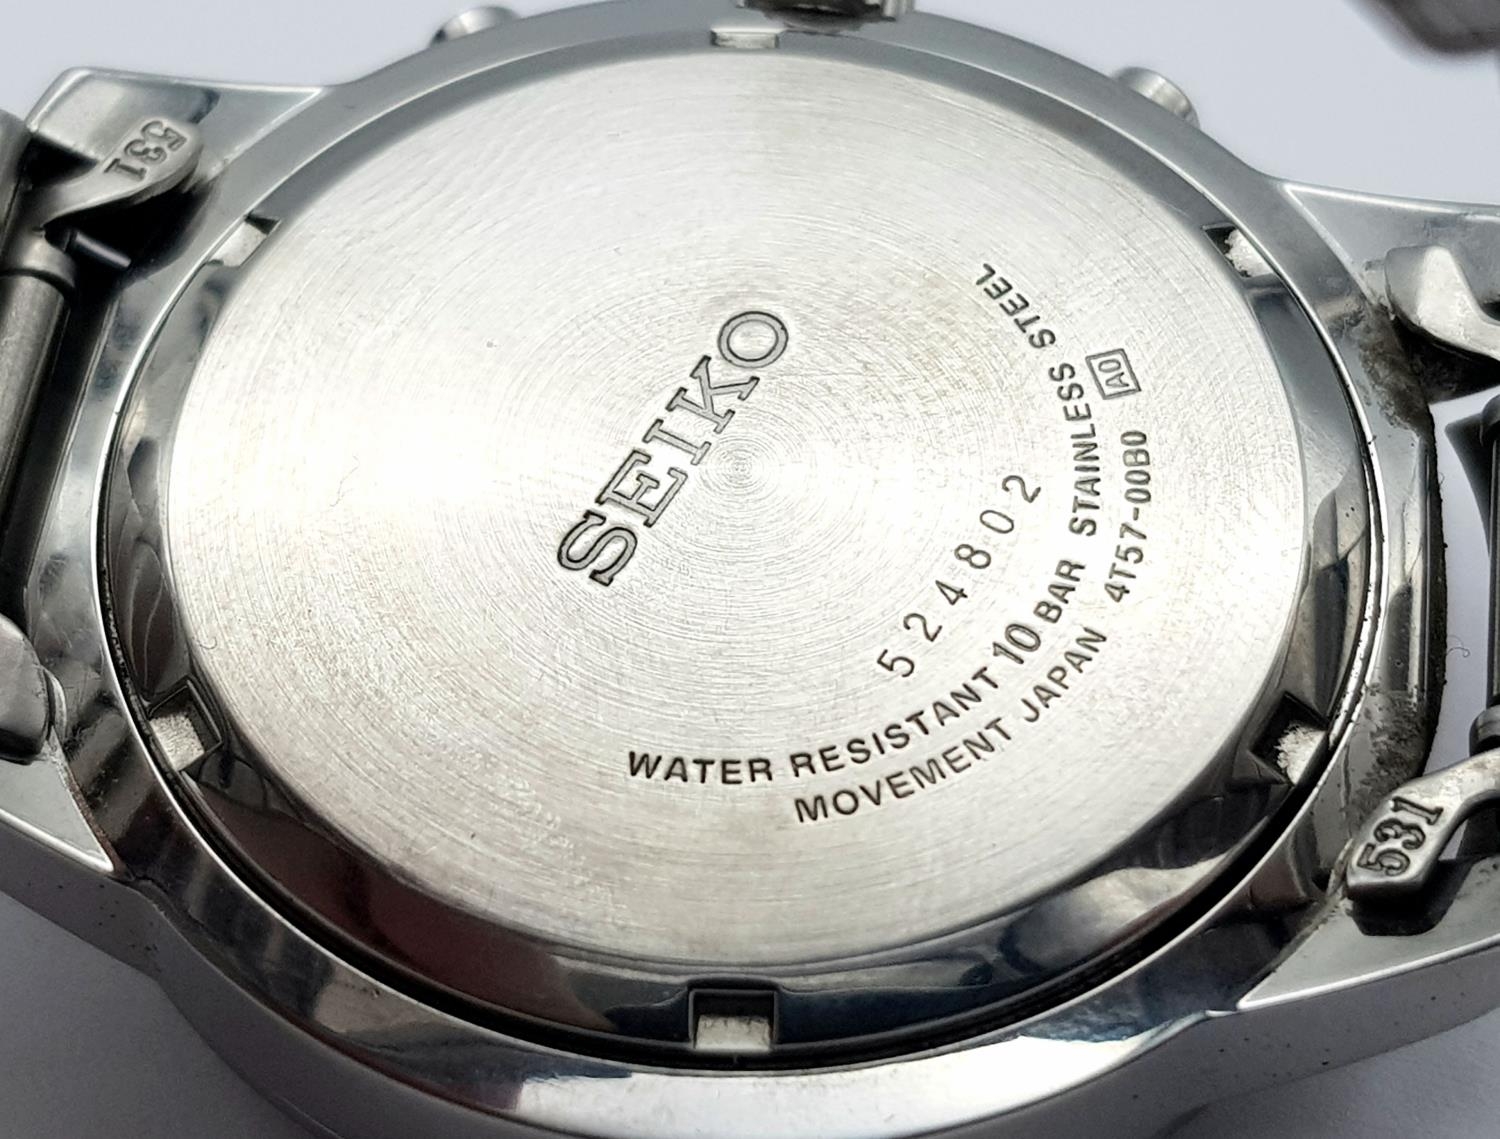 A Seiko 5 Chronograph Quartz Gents Watch. Stainless steel bracelet and case - 43mm. White dial - Image 4 of 6